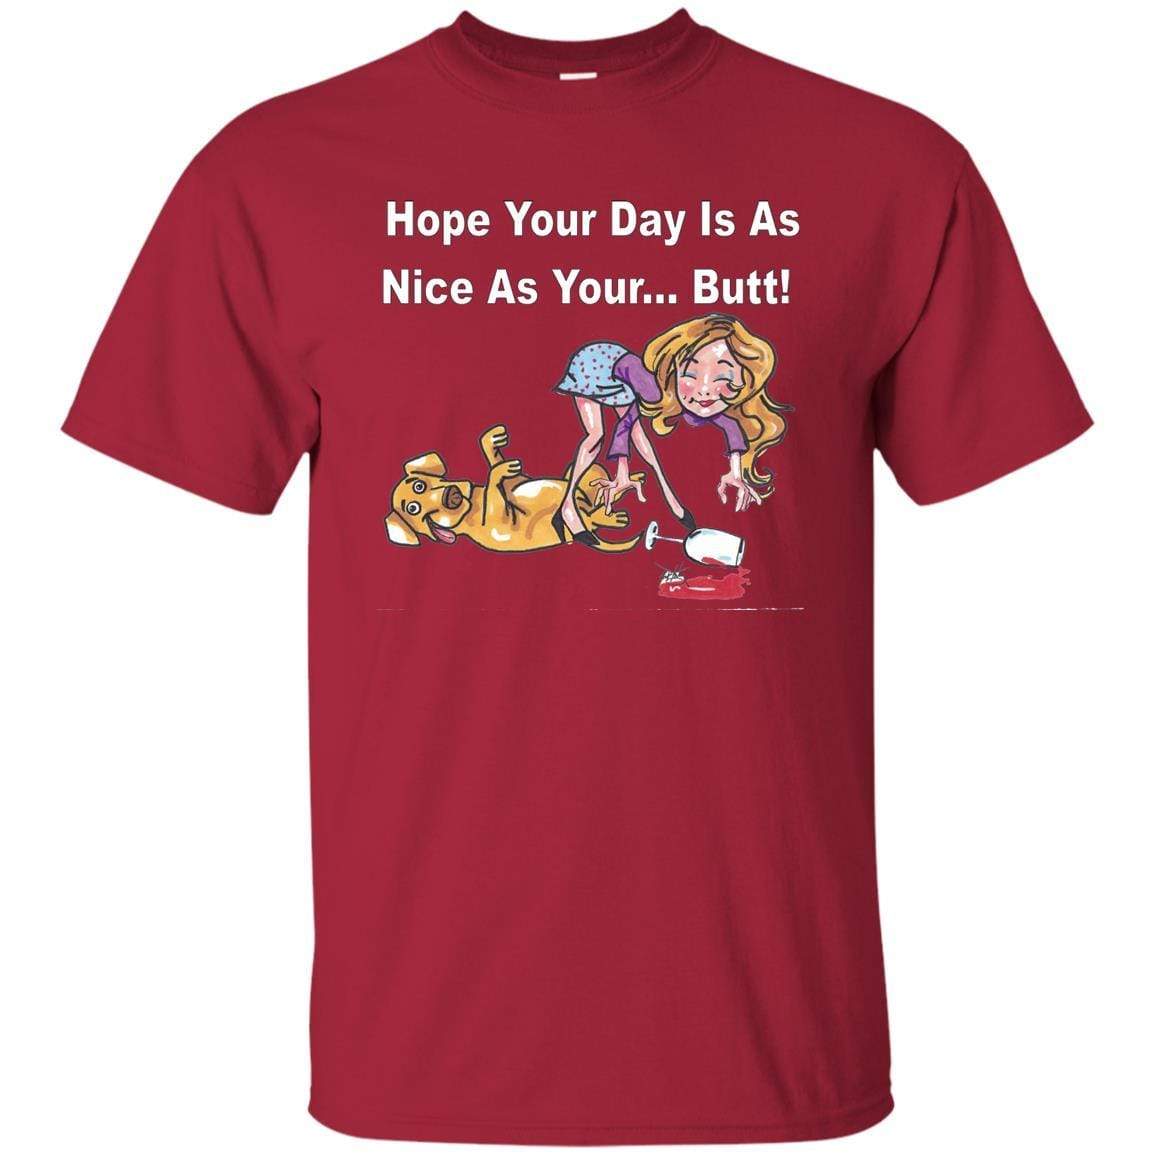 T-Shirts Cardinal / S WineyBitches.co "Hope Your Day Is As Nice As Your...Butt" White Lettering Ultra Cotton T-Shirt WineyBitchesCo